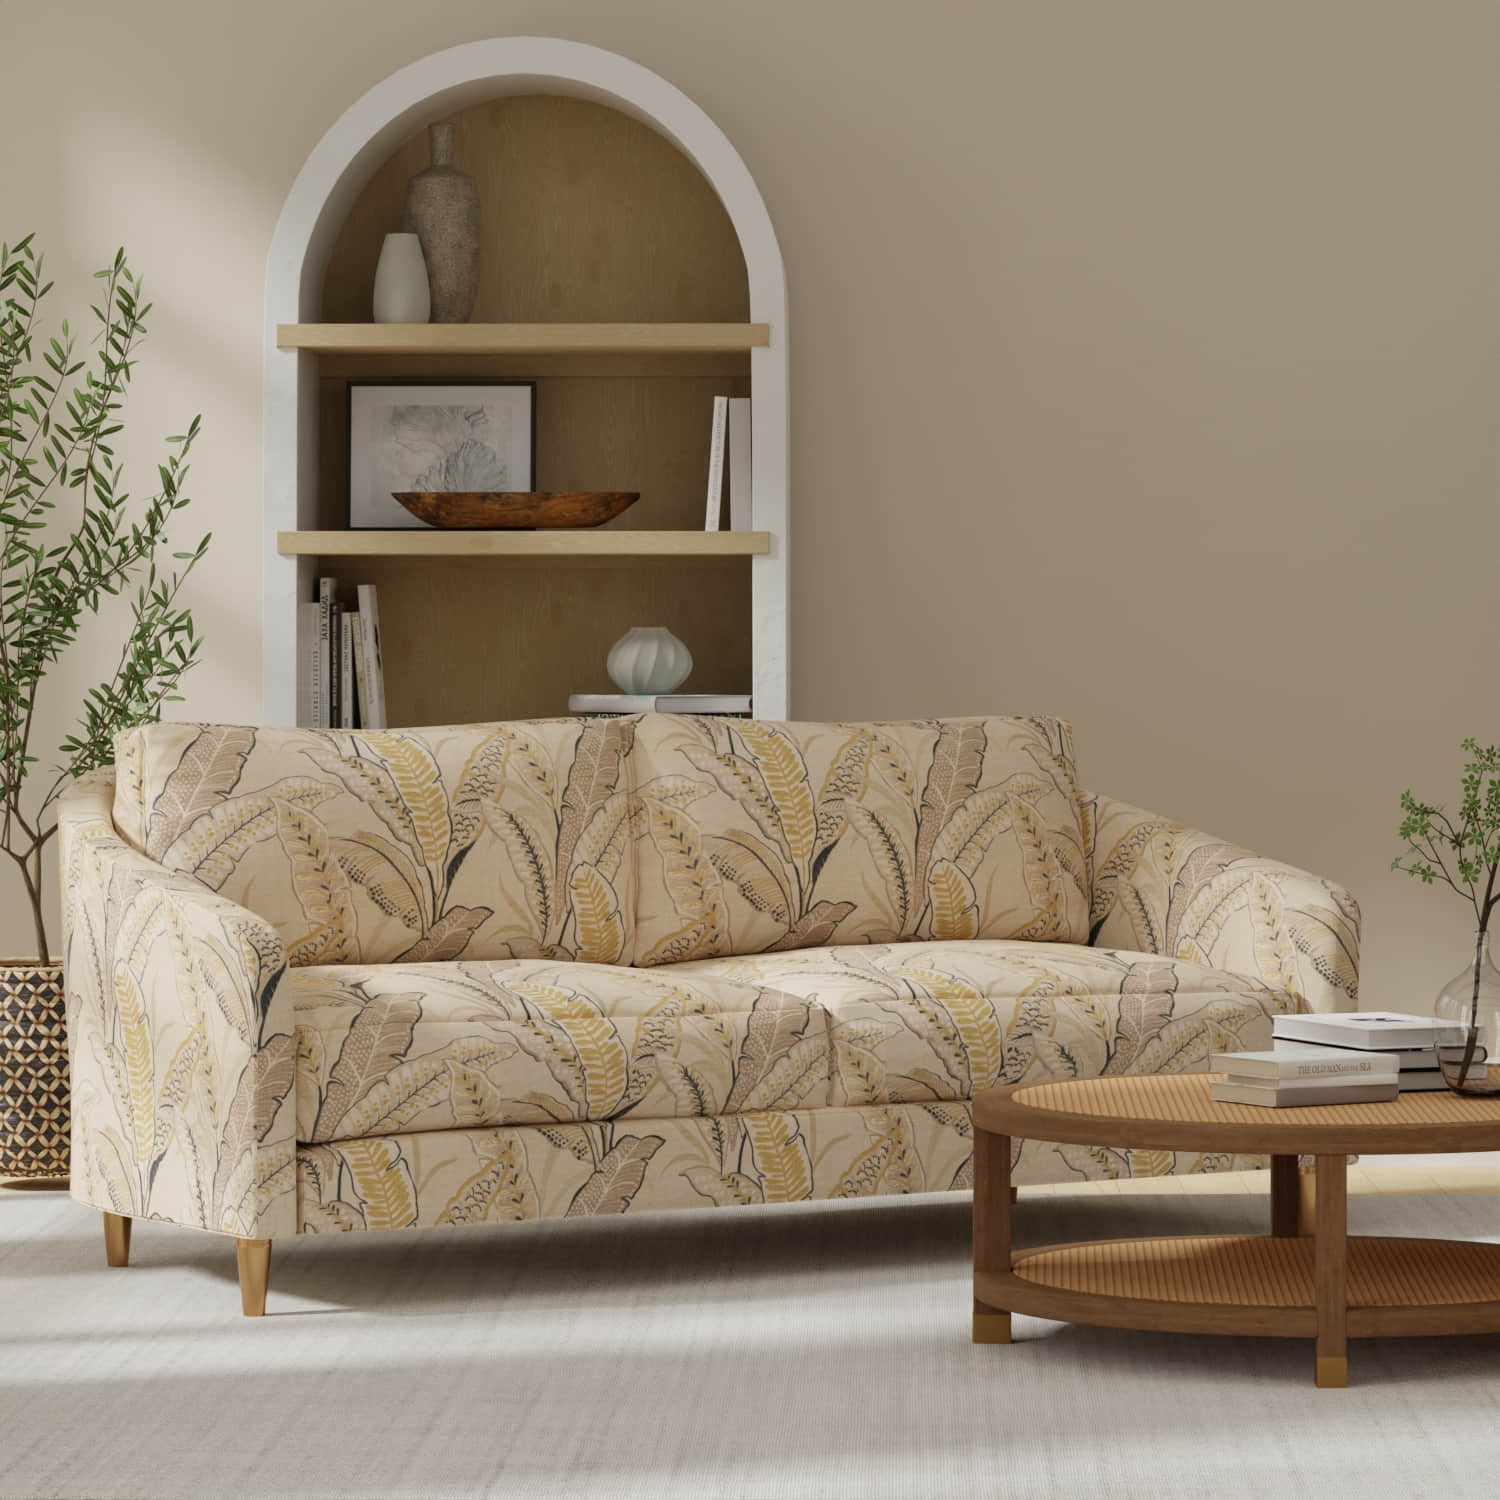 Berkley Wheat upholstered on a couch